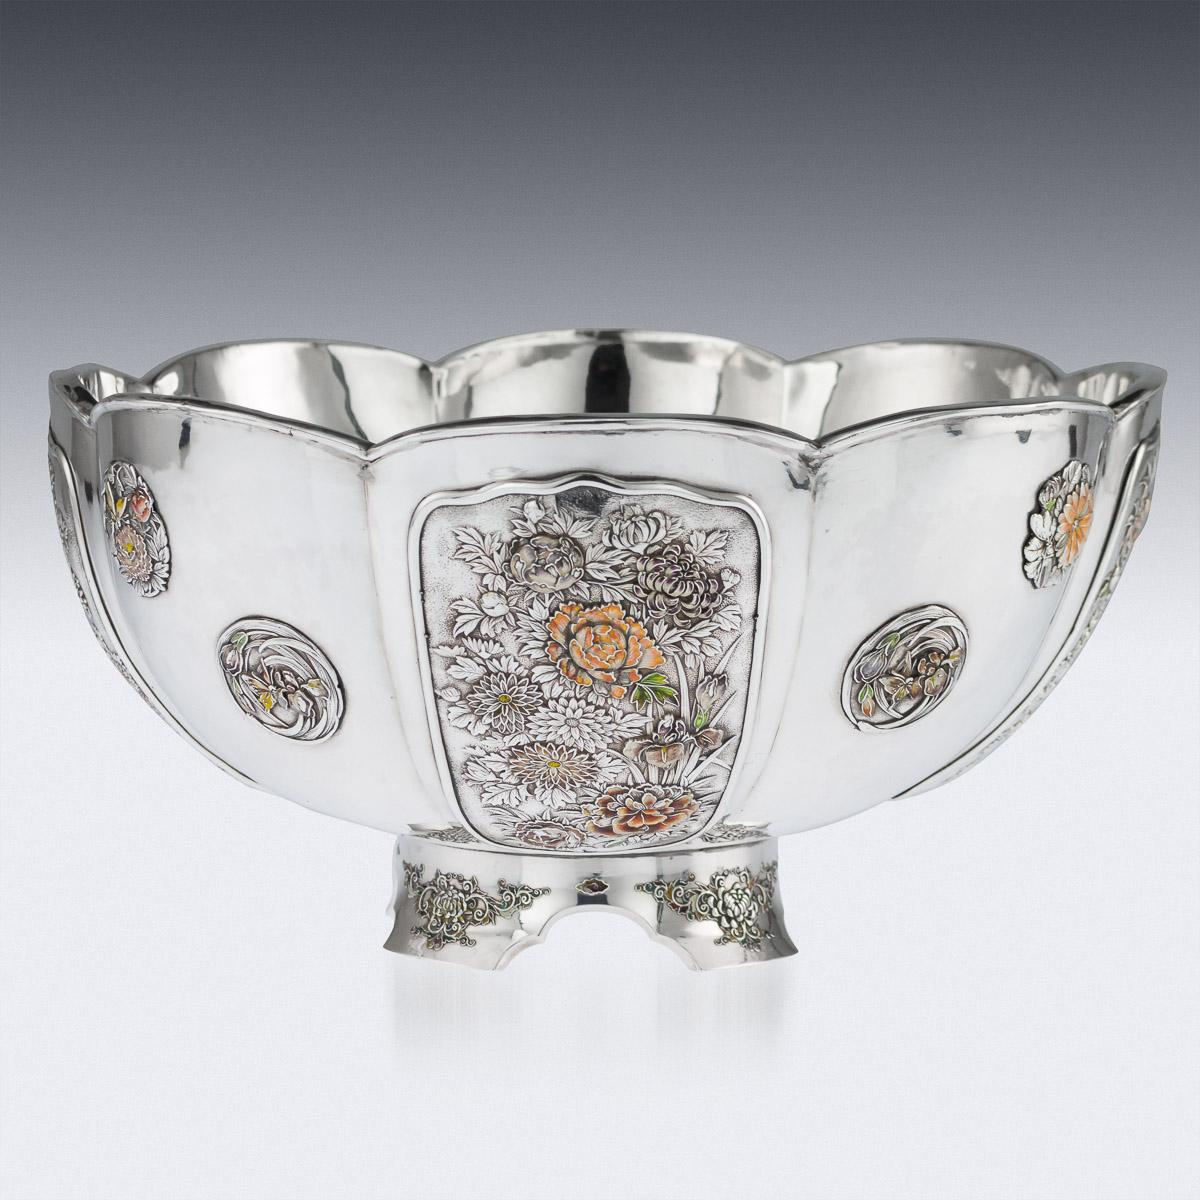 Antique 20th Century Japanese Meiji Period Solid Silver & Enamel Bowl circa 1900 In Good Condition For Sale In Royal Tunbridge Wells, Kent